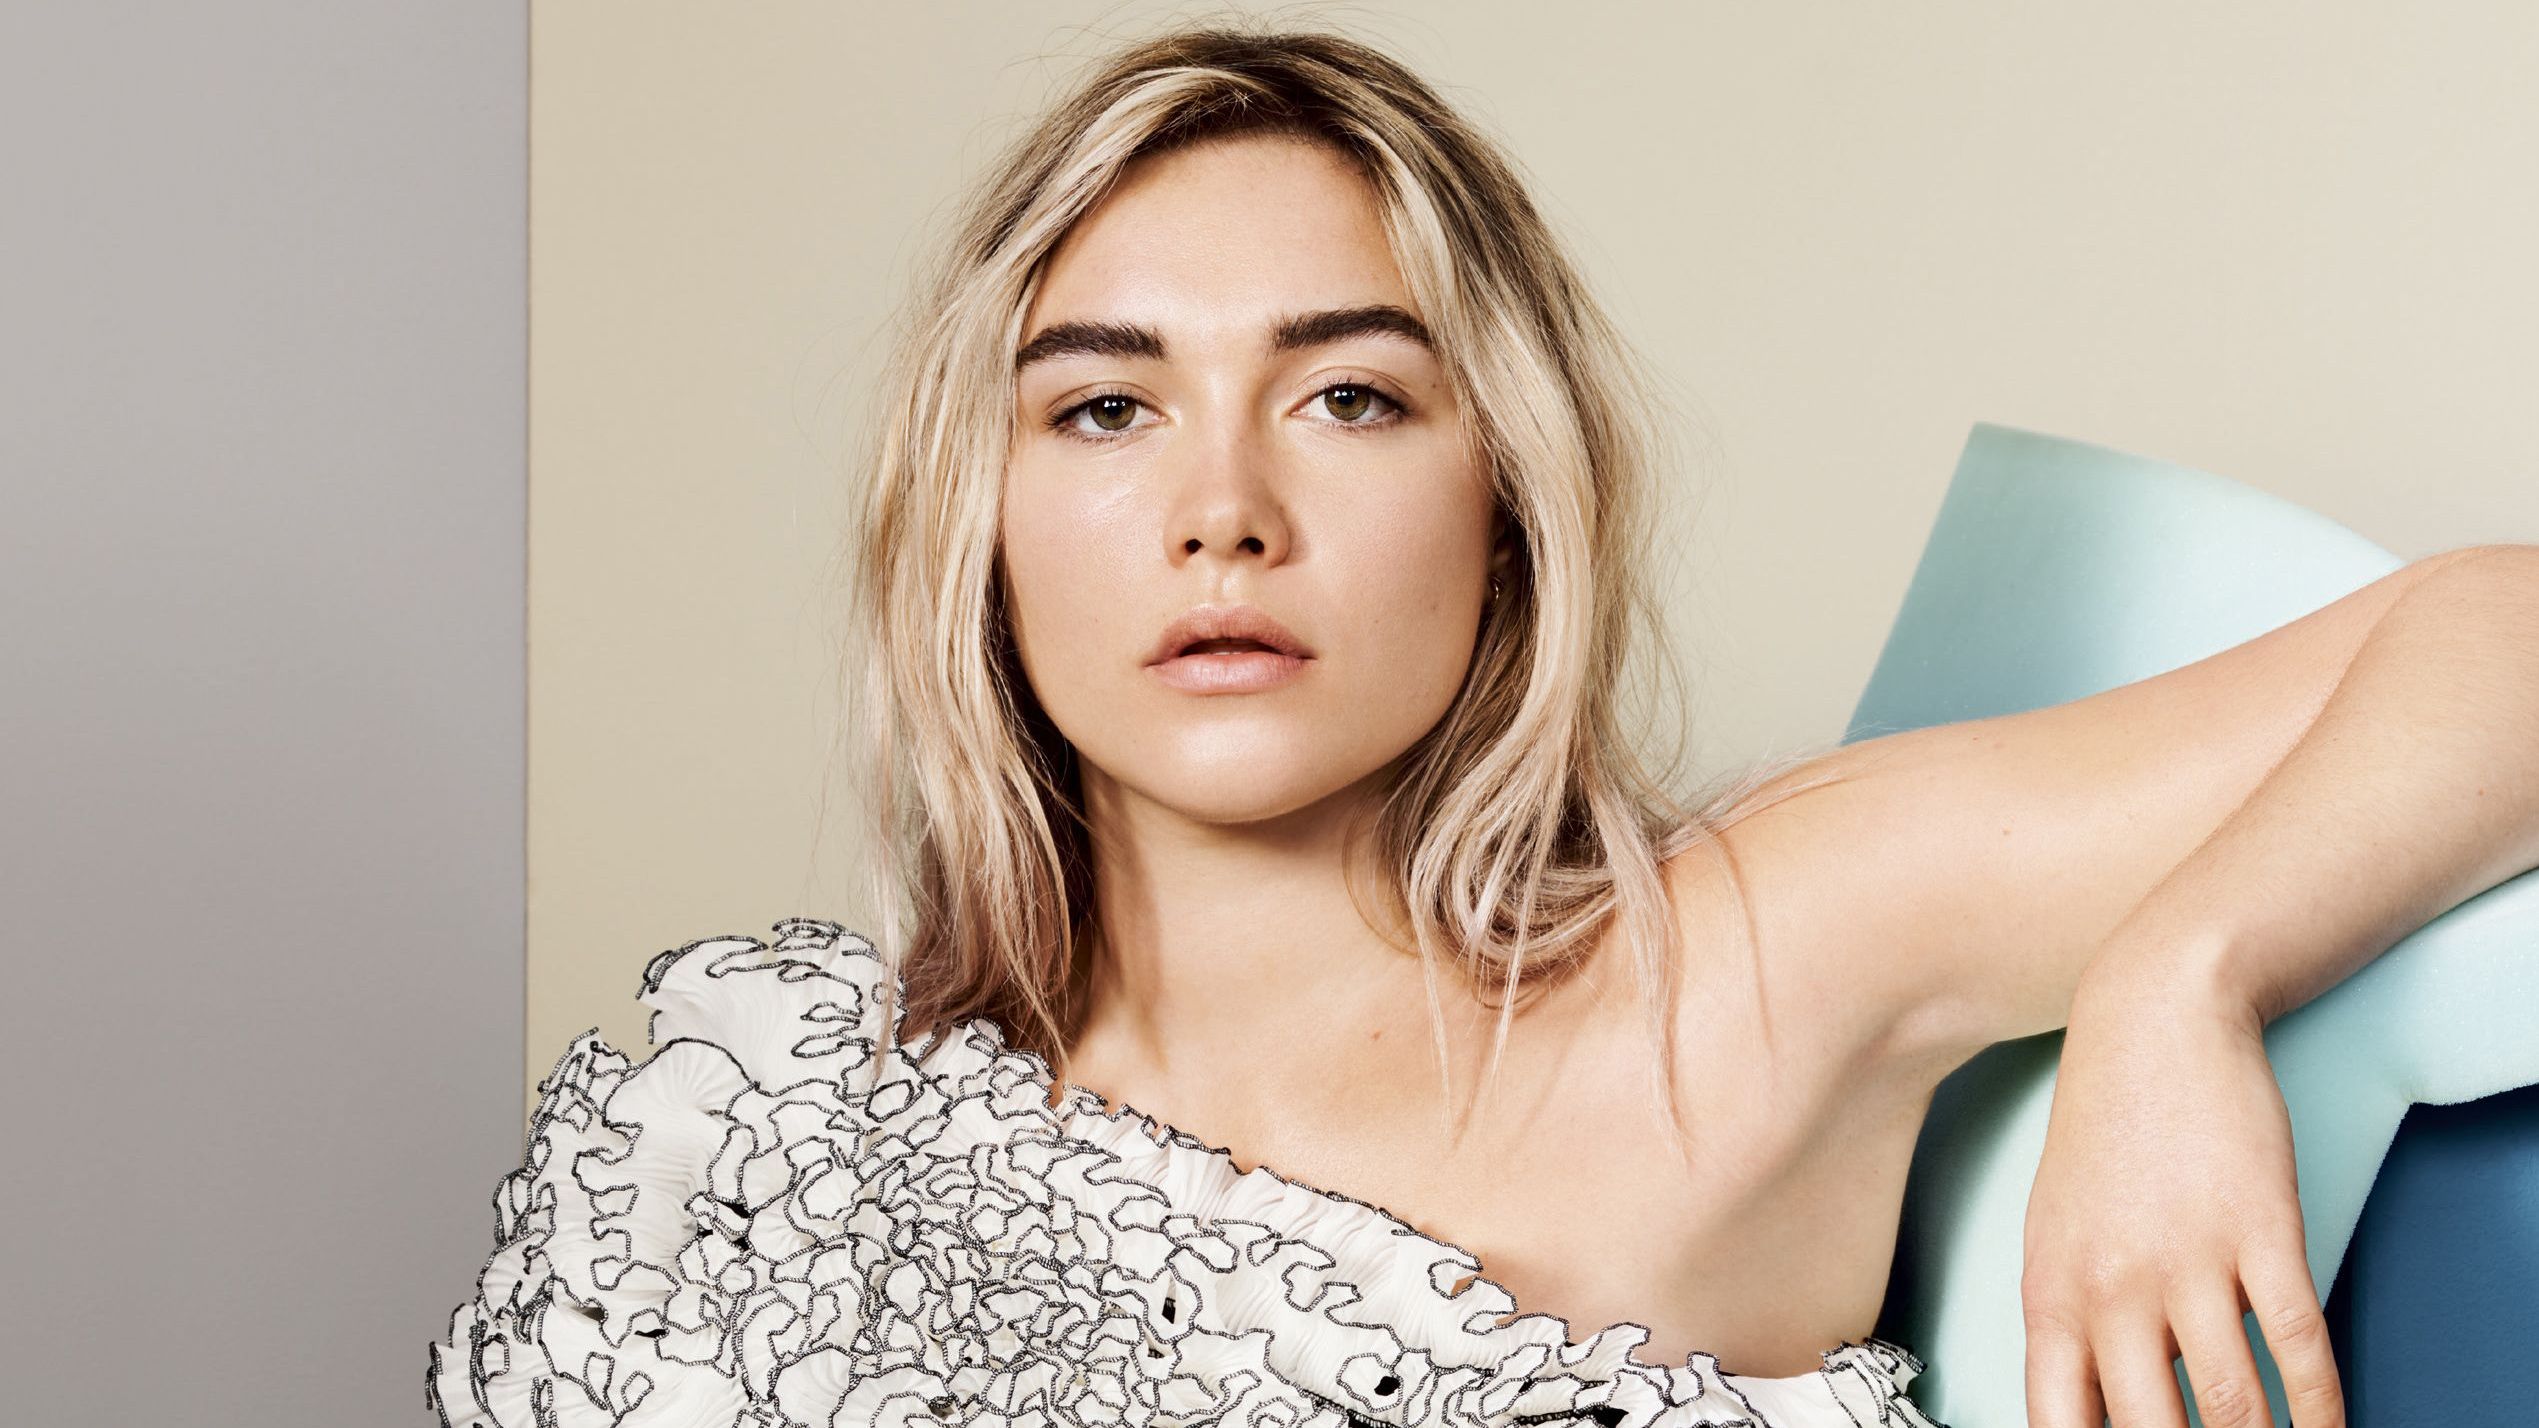 Florence Pugh leaning on a blue chair - Florence Pugh